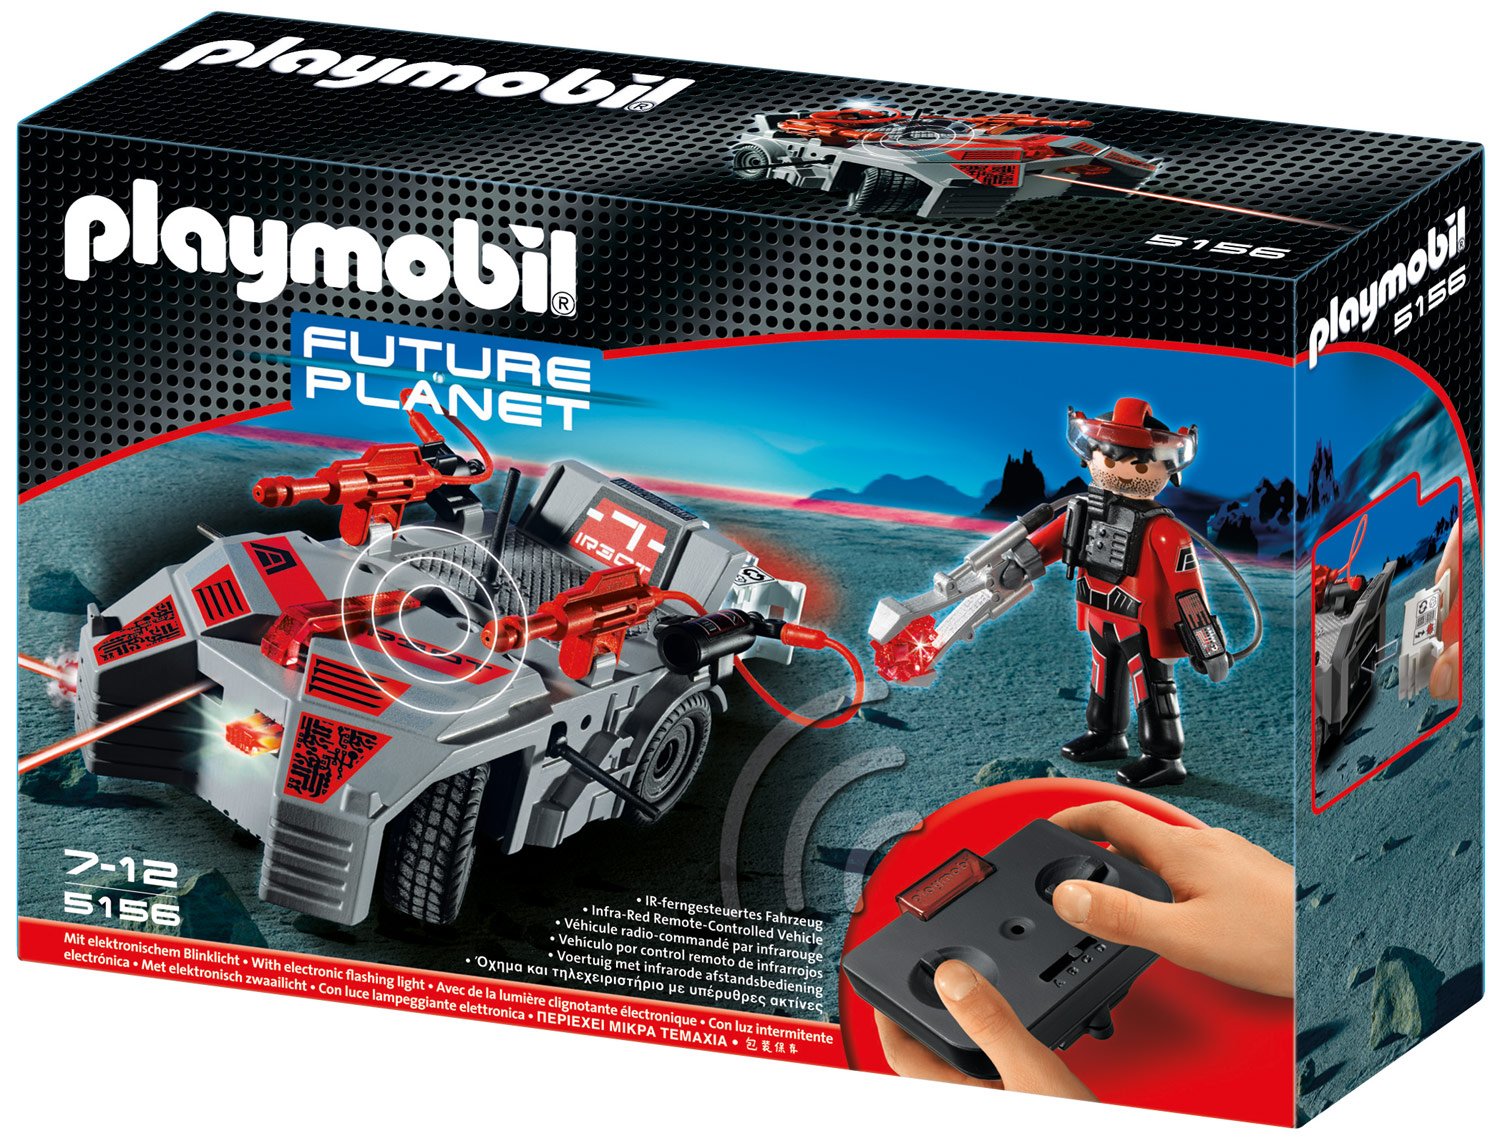 Playmobil Darksters Explorer With Flash Cannon And Infra Red Remote Control